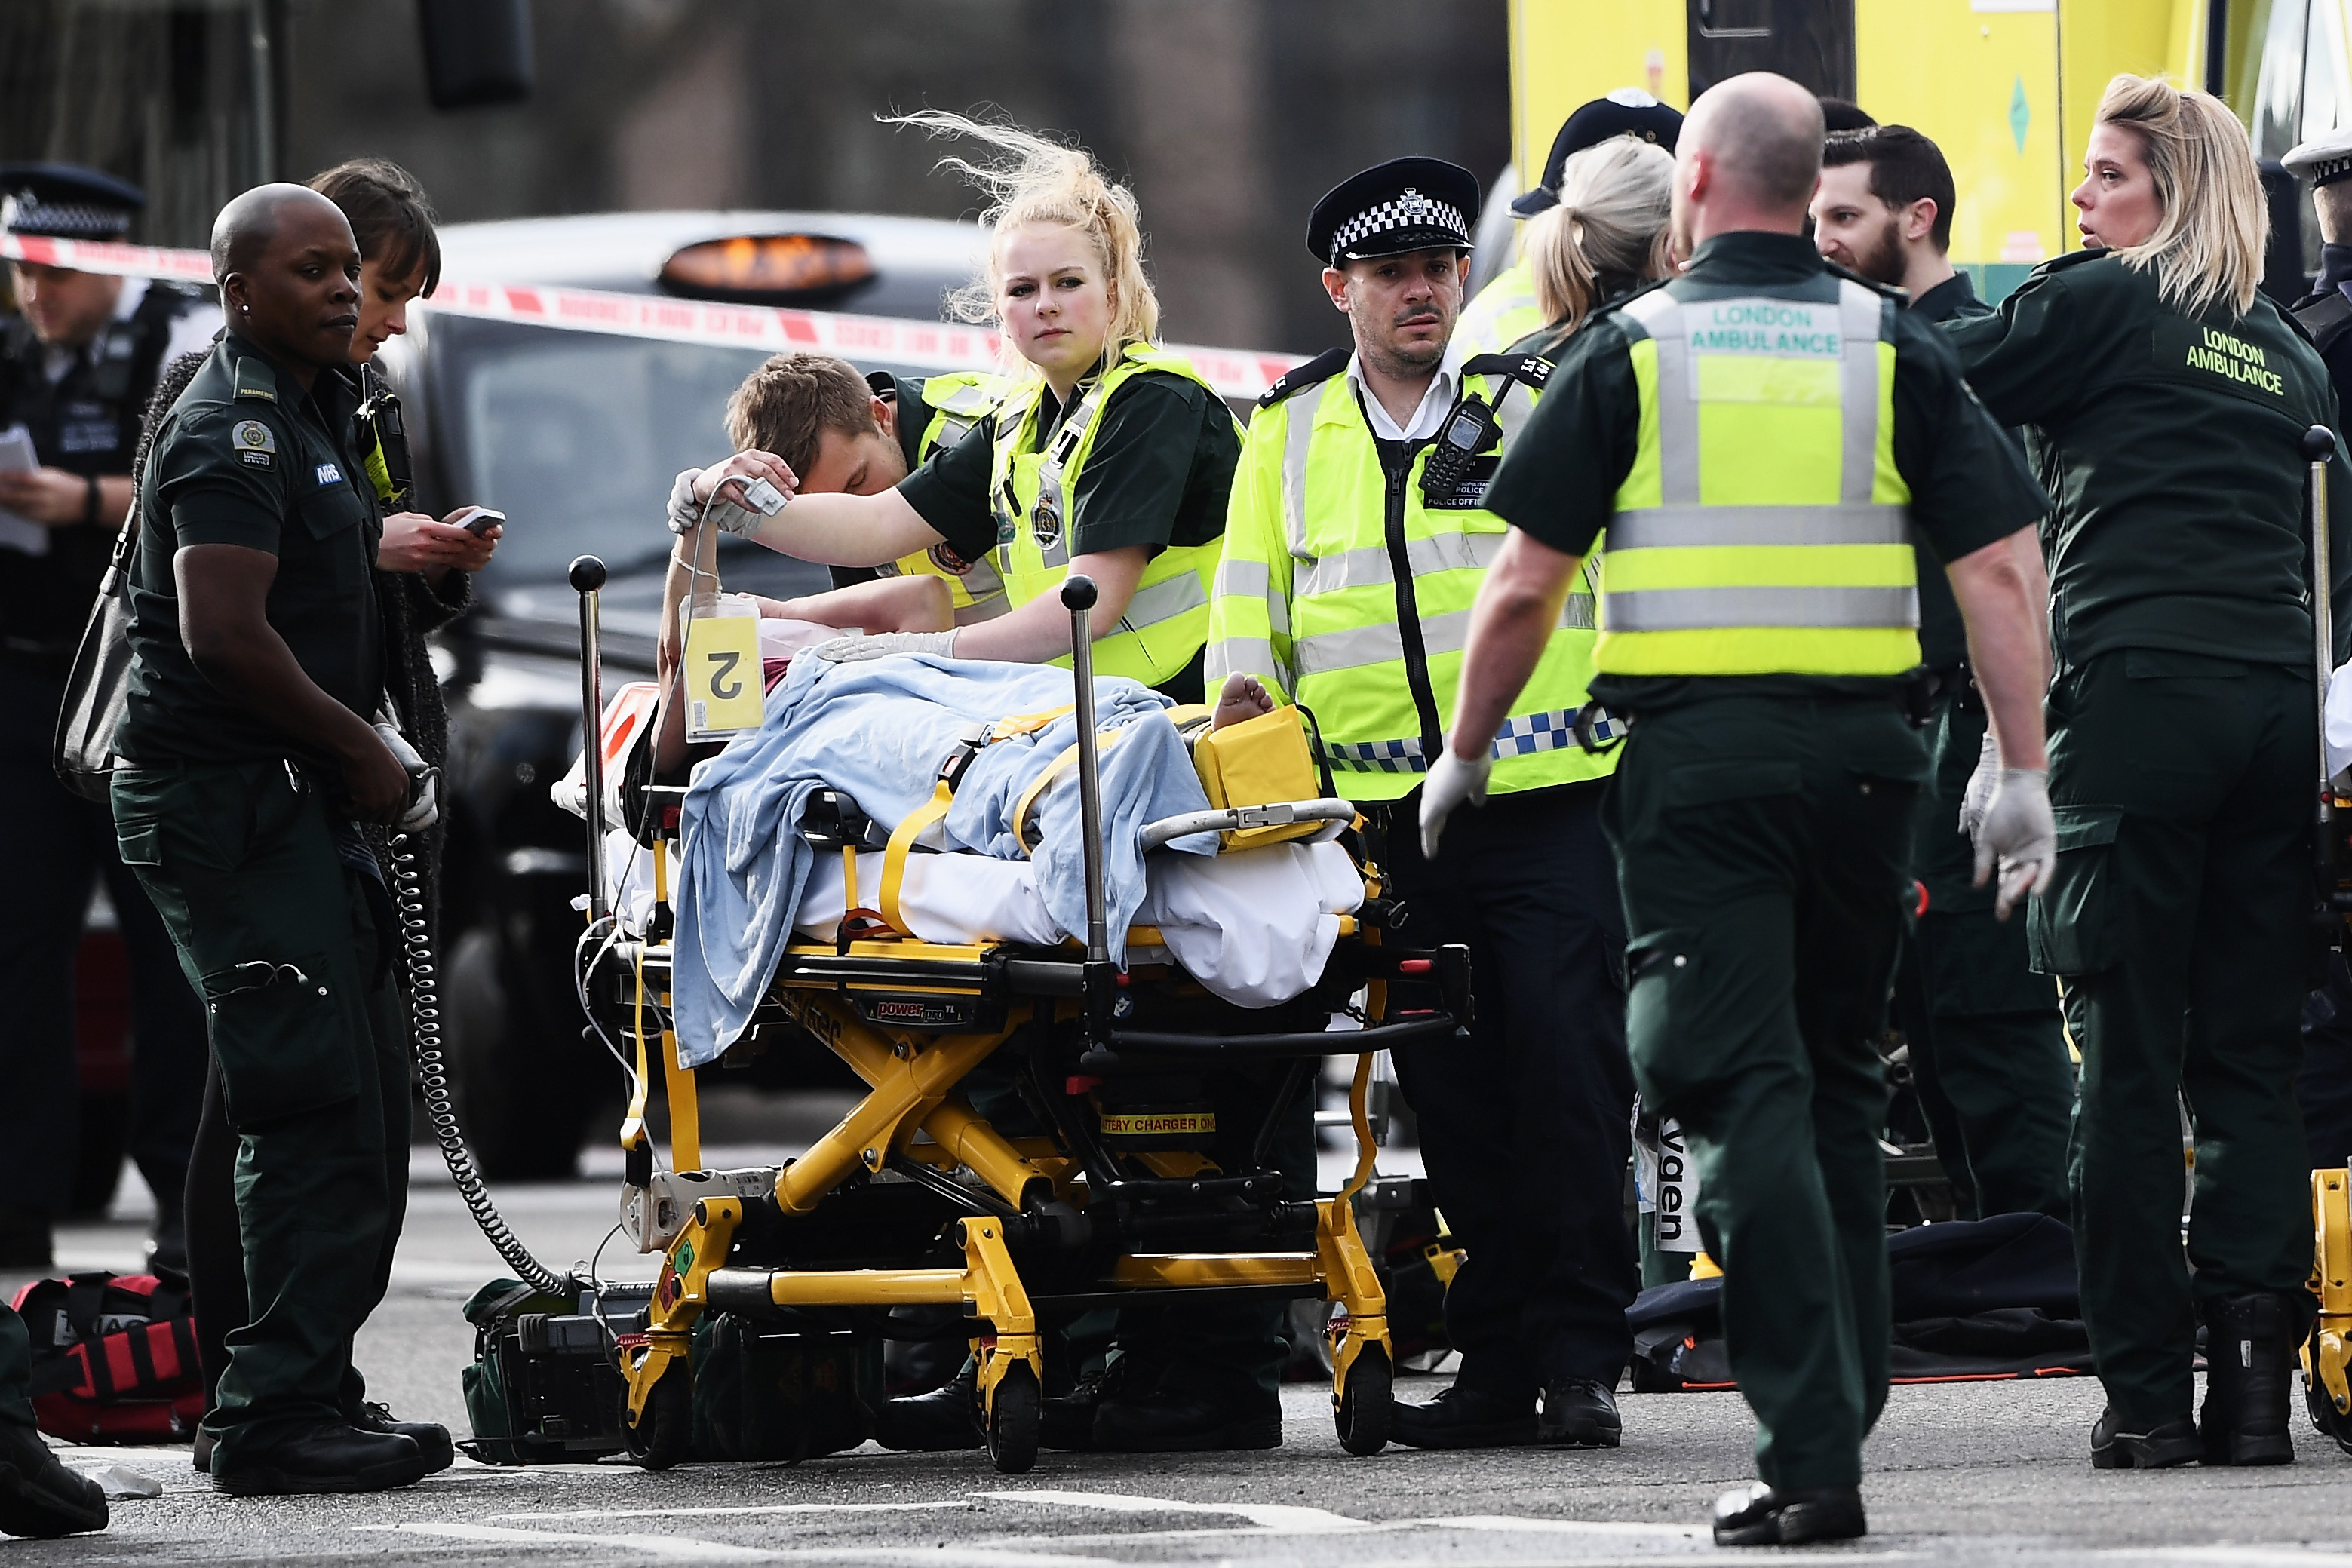 A member of the public is treated by emergency services near Westminster Bridge and the Houses of Parliament on March 22, 2017 in London, England. (Carl Court&mdash;Getty Images)